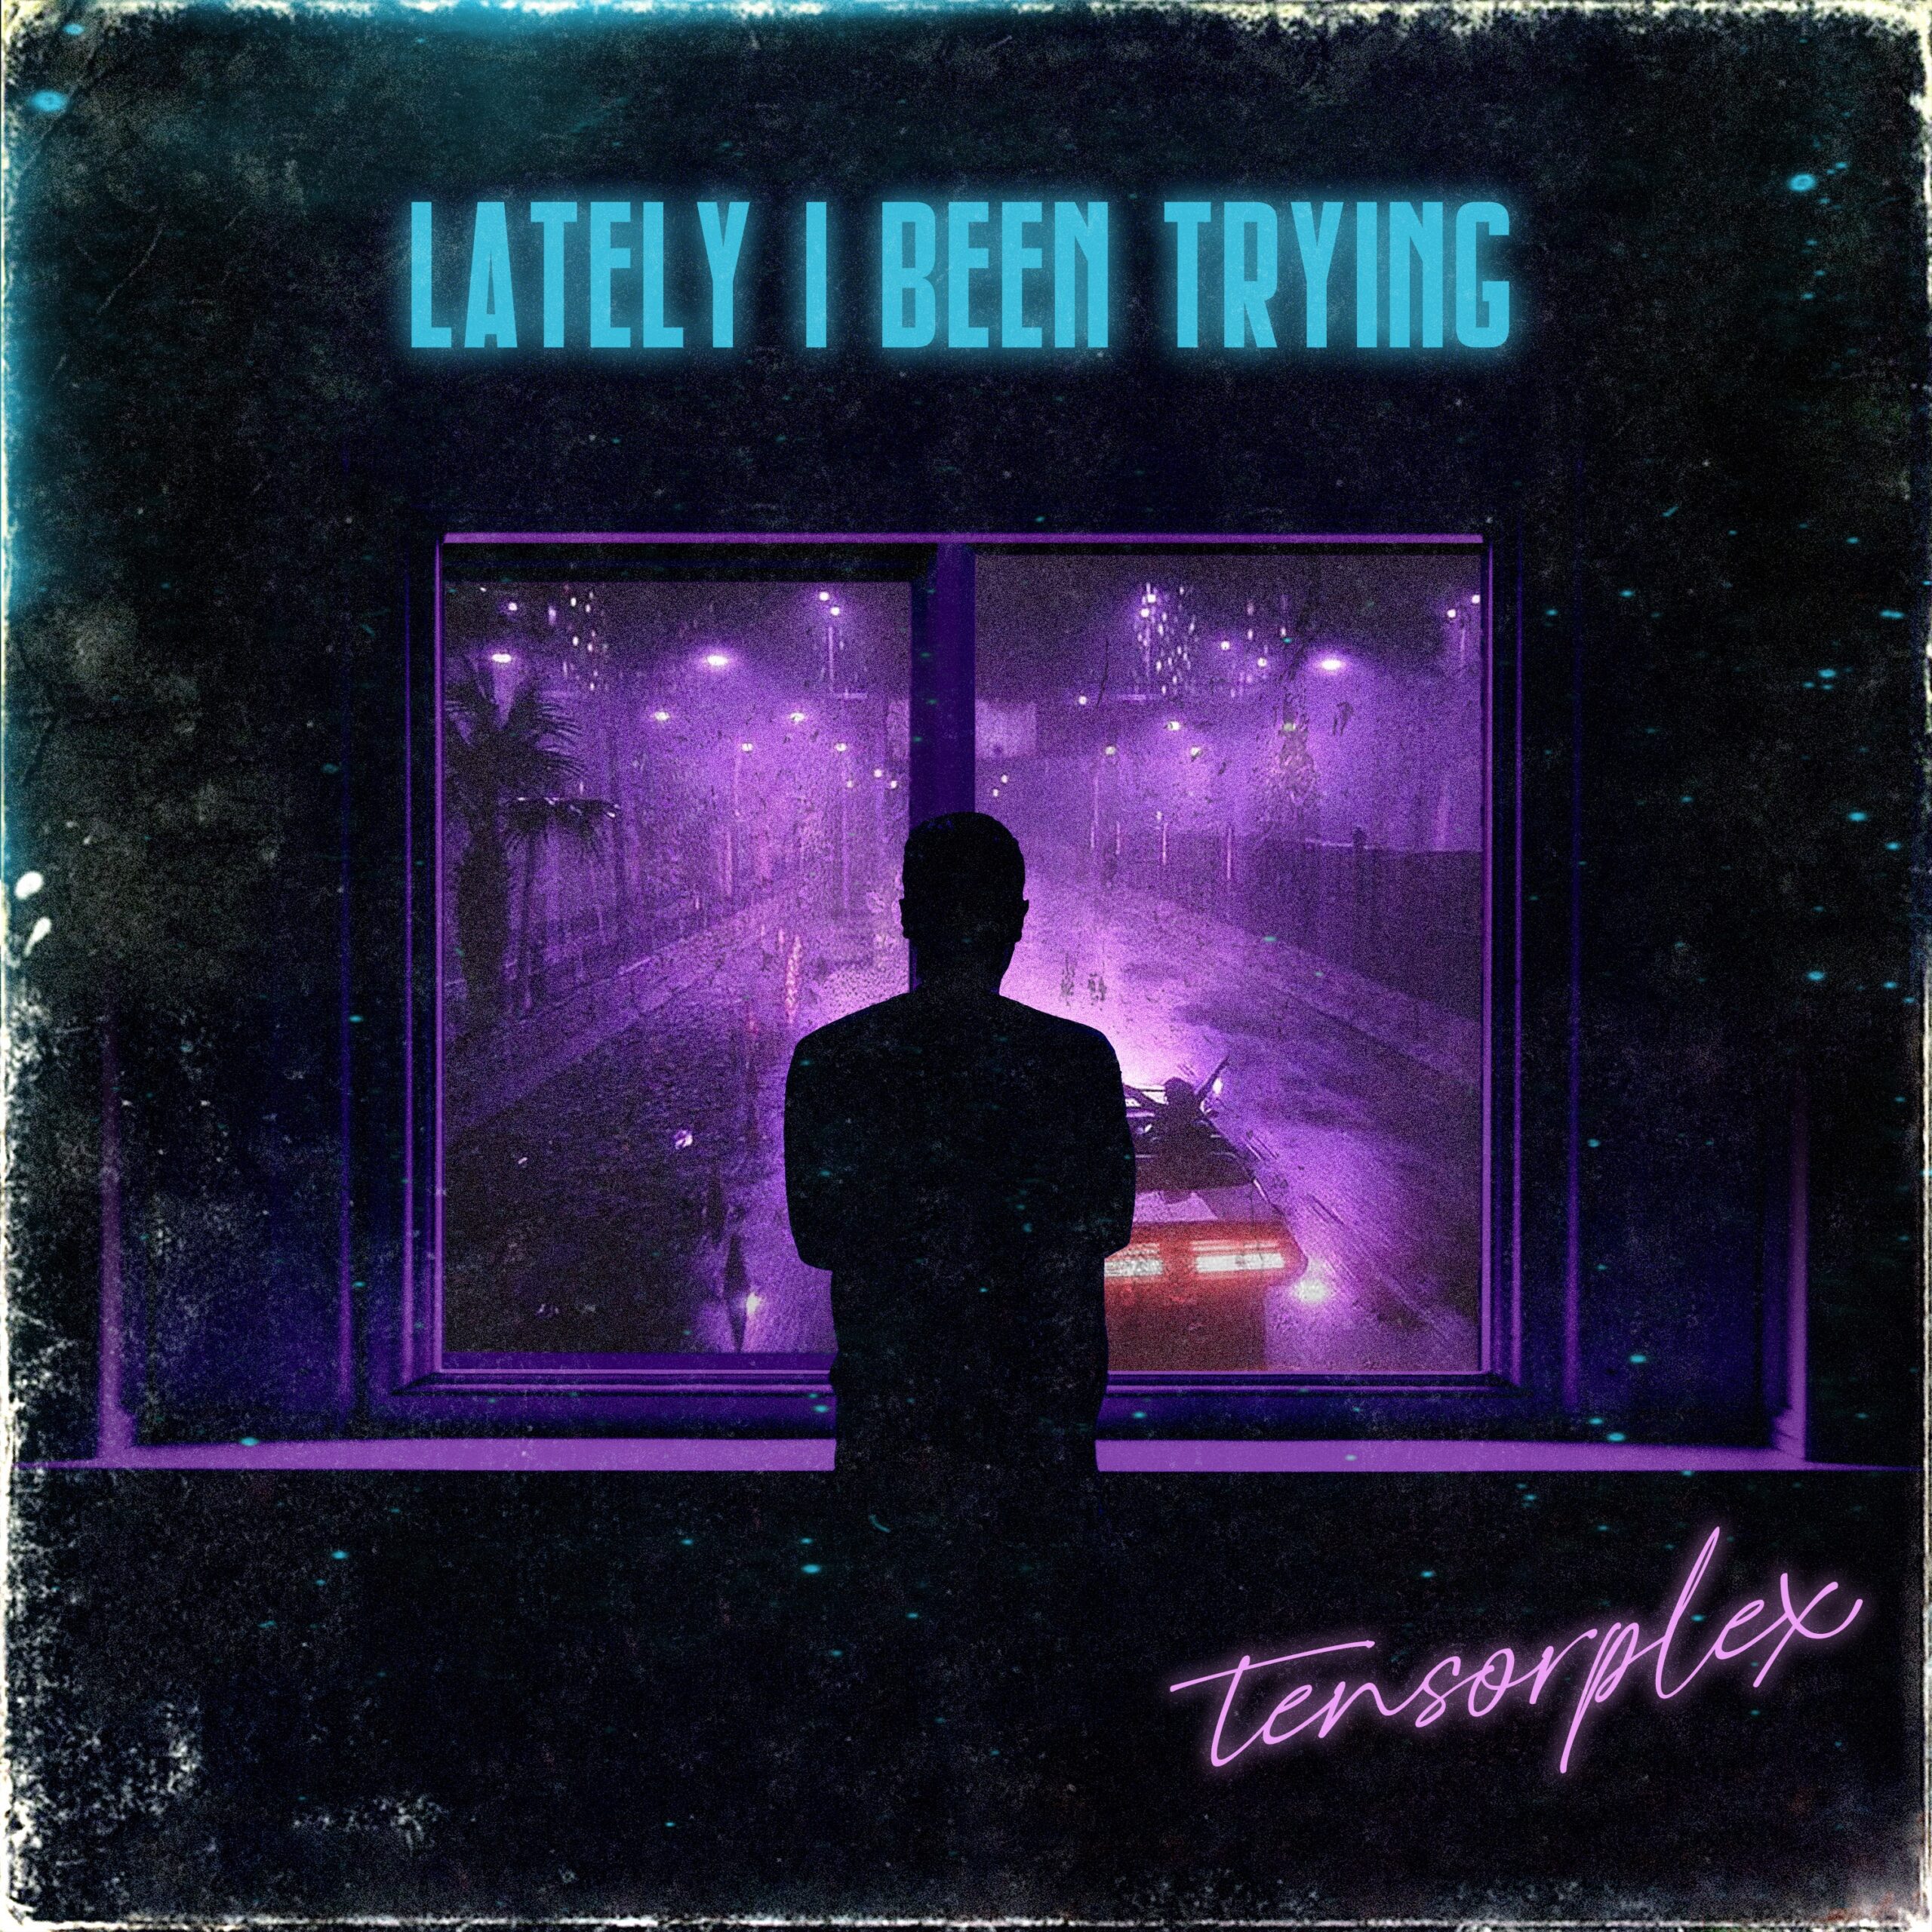 tensorplex – ‘Lately I Been Trying’